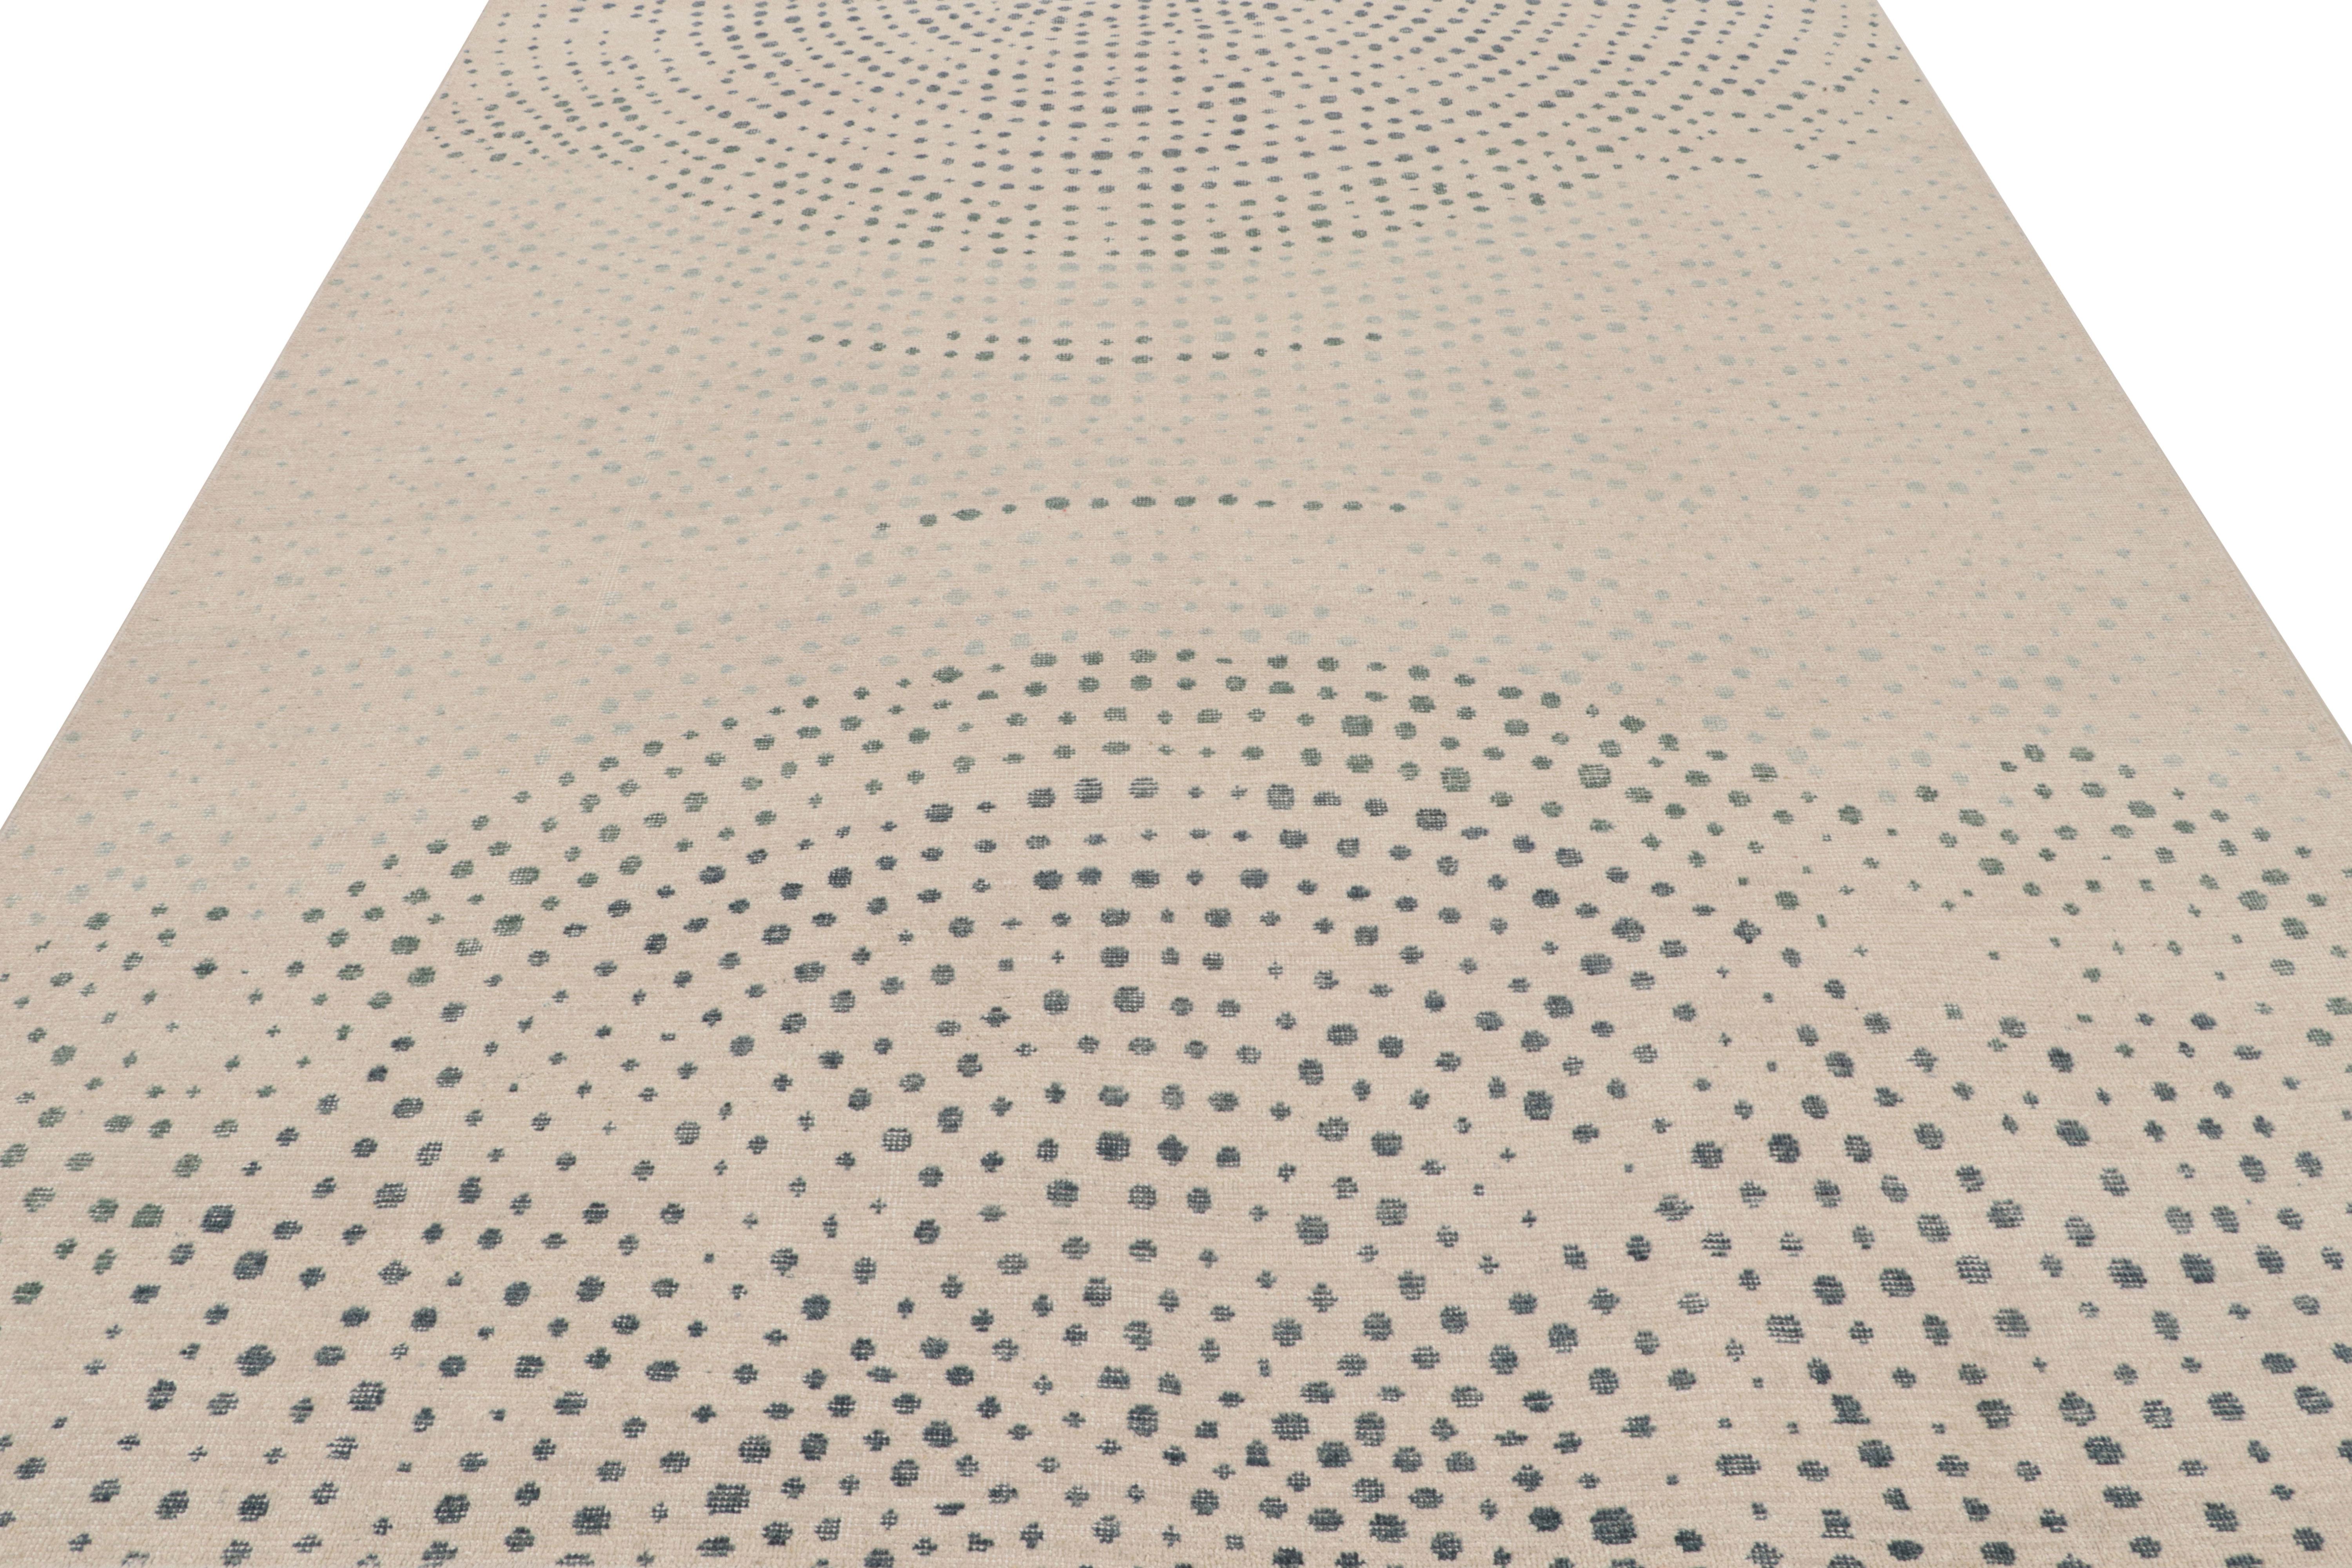 Hand-knotted in wool, this 8x10 abstract rug originating from India, in more contemporary colors of beige/brown and blue, features concentric dots. 

On the Design: 

This piece enjoys a contemporary abstract pattern in a forgiving beige, off-white,